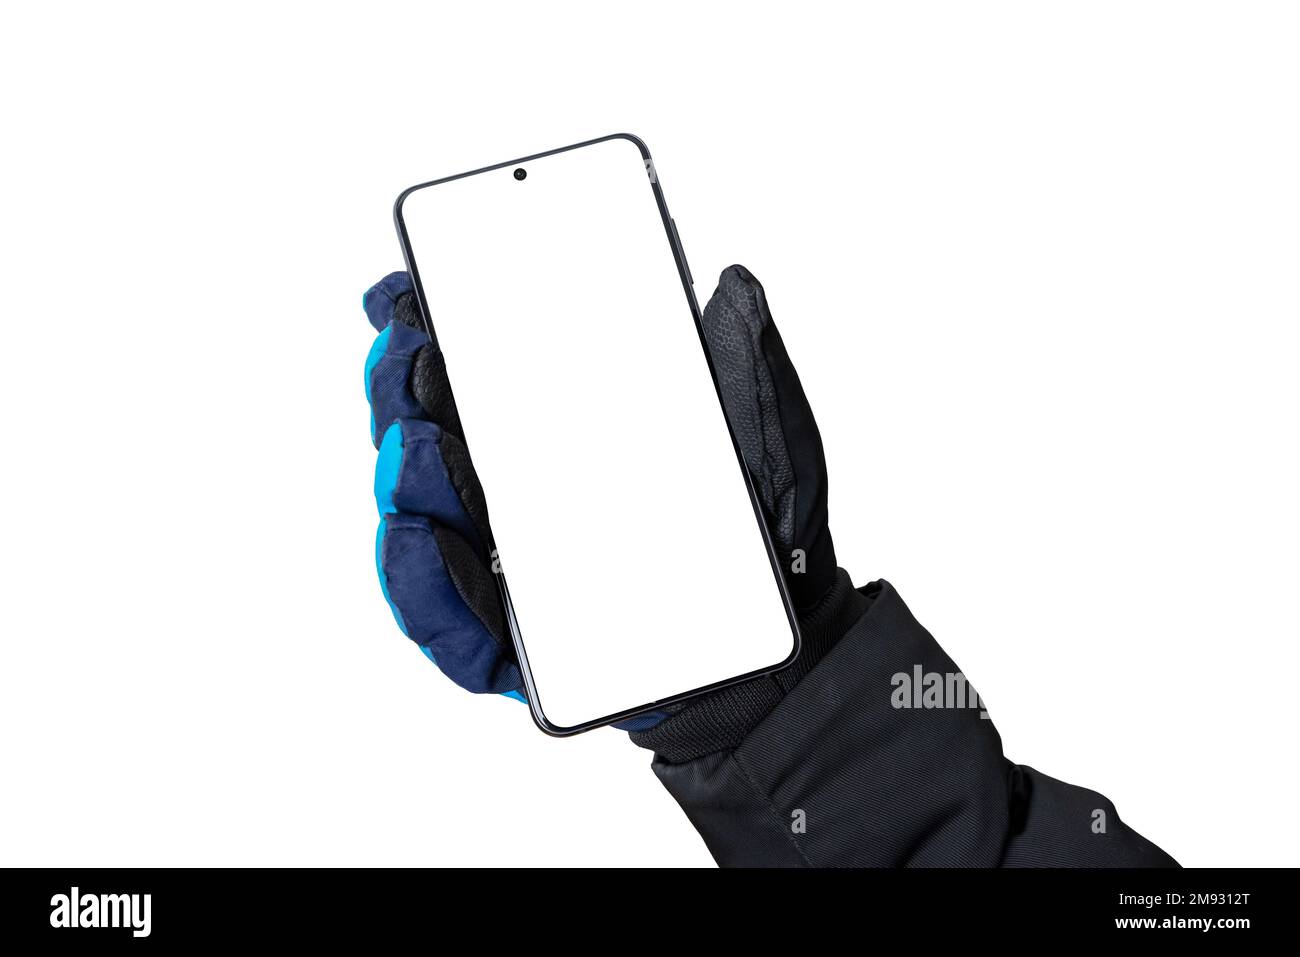 Winter mockup of a phone in a hand wearing a glove, for promoting app or web page design. Close-up Stock Photo